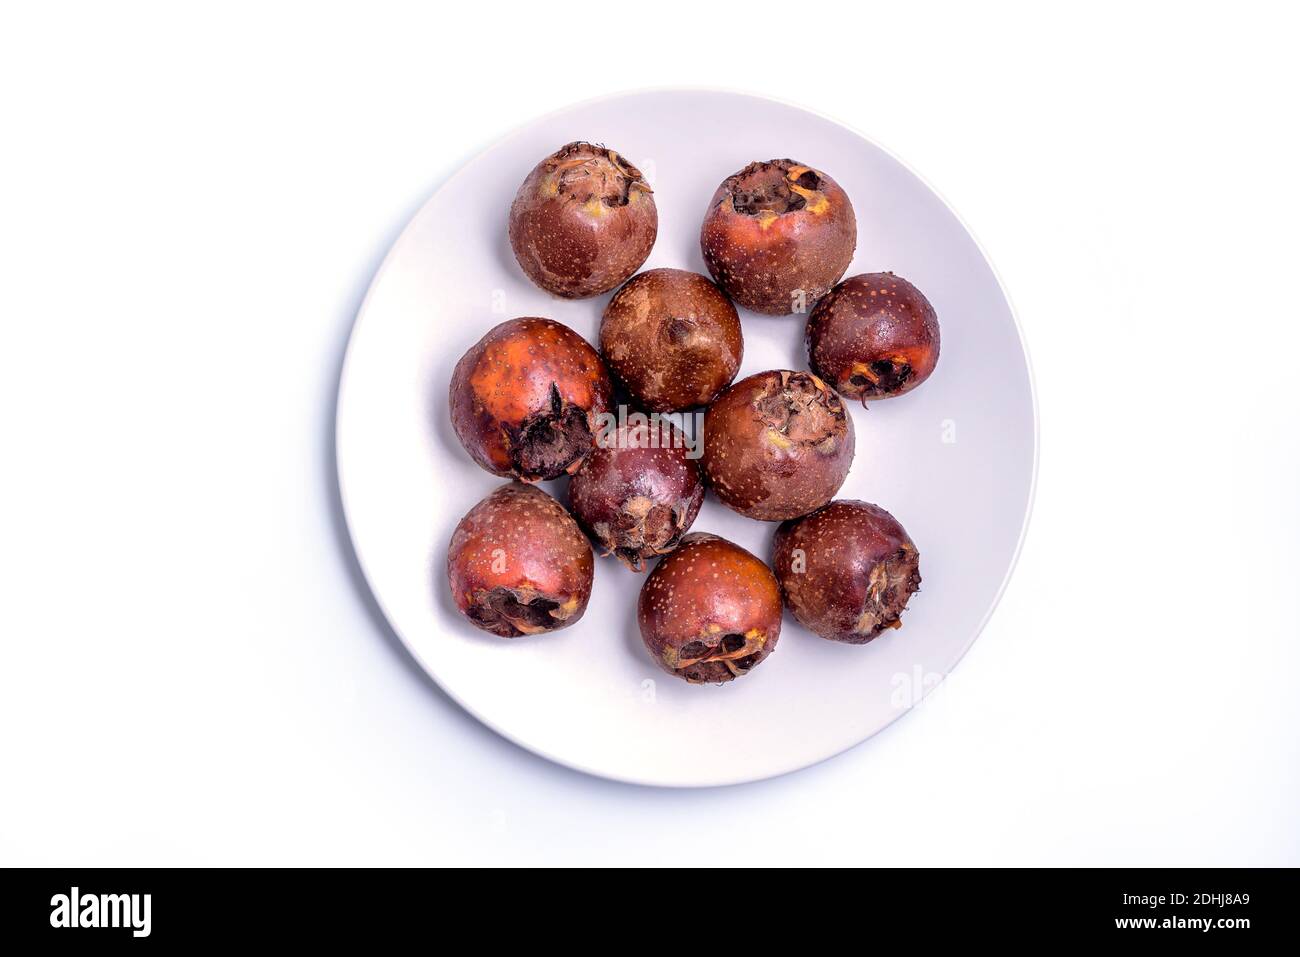 Fresh ripe organic common medlar fruit on a plate on white background. Healthy food Mespilus germanica, top view Stock Photo